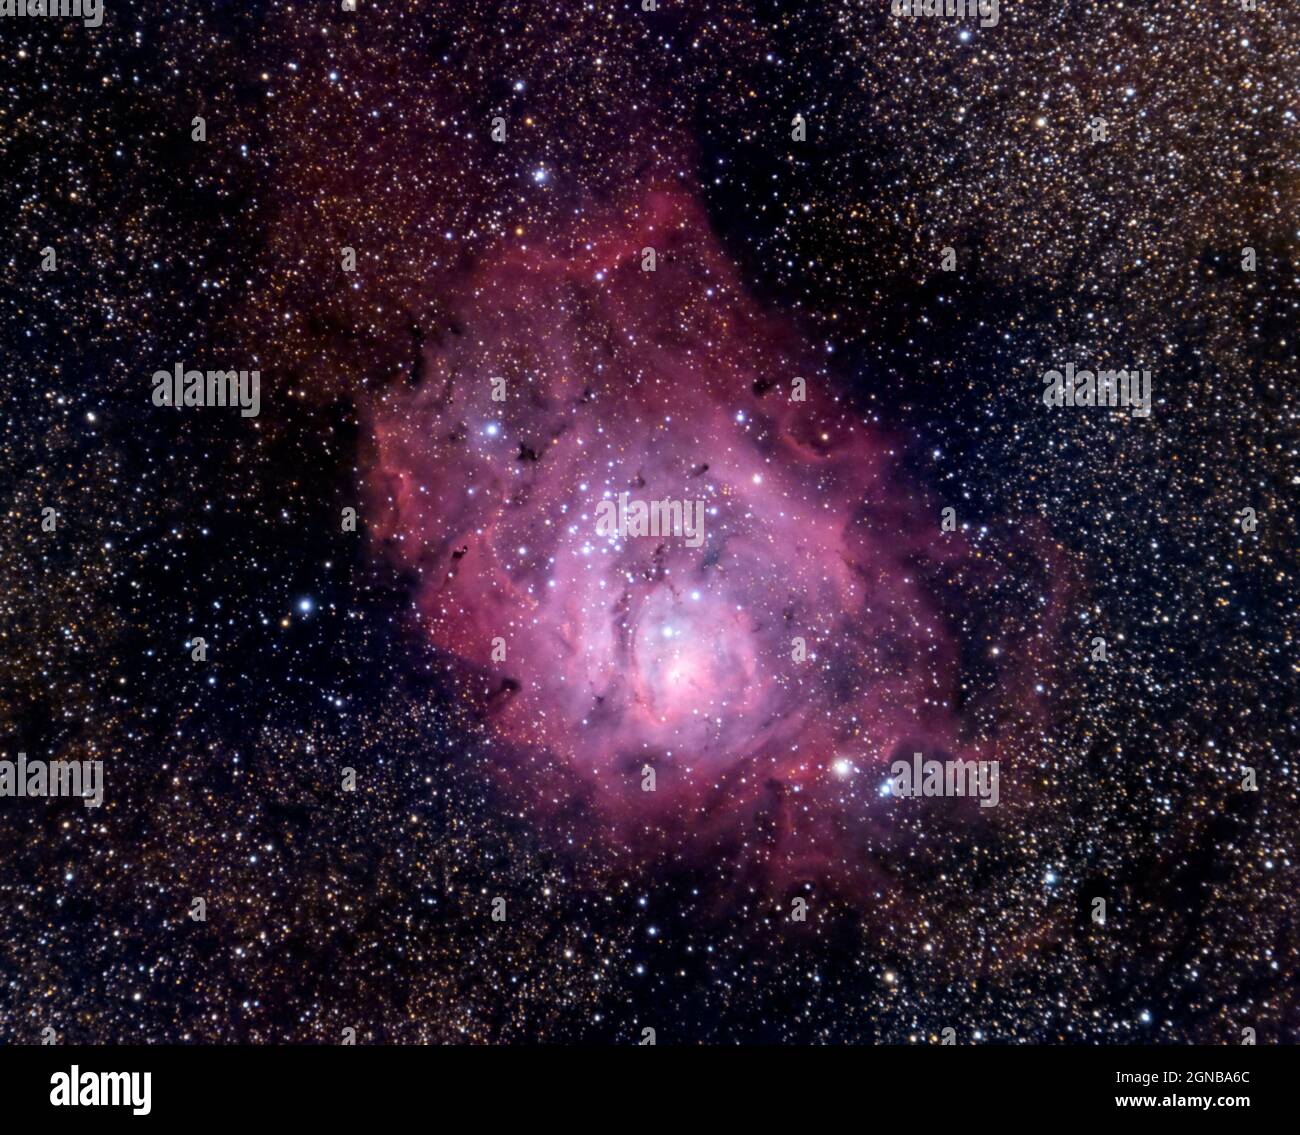 The Lagoon Nebula (Messier 8 or NGC 6523) is a giant interstellar cloud in the constellation Sagittarius. Stock Photo